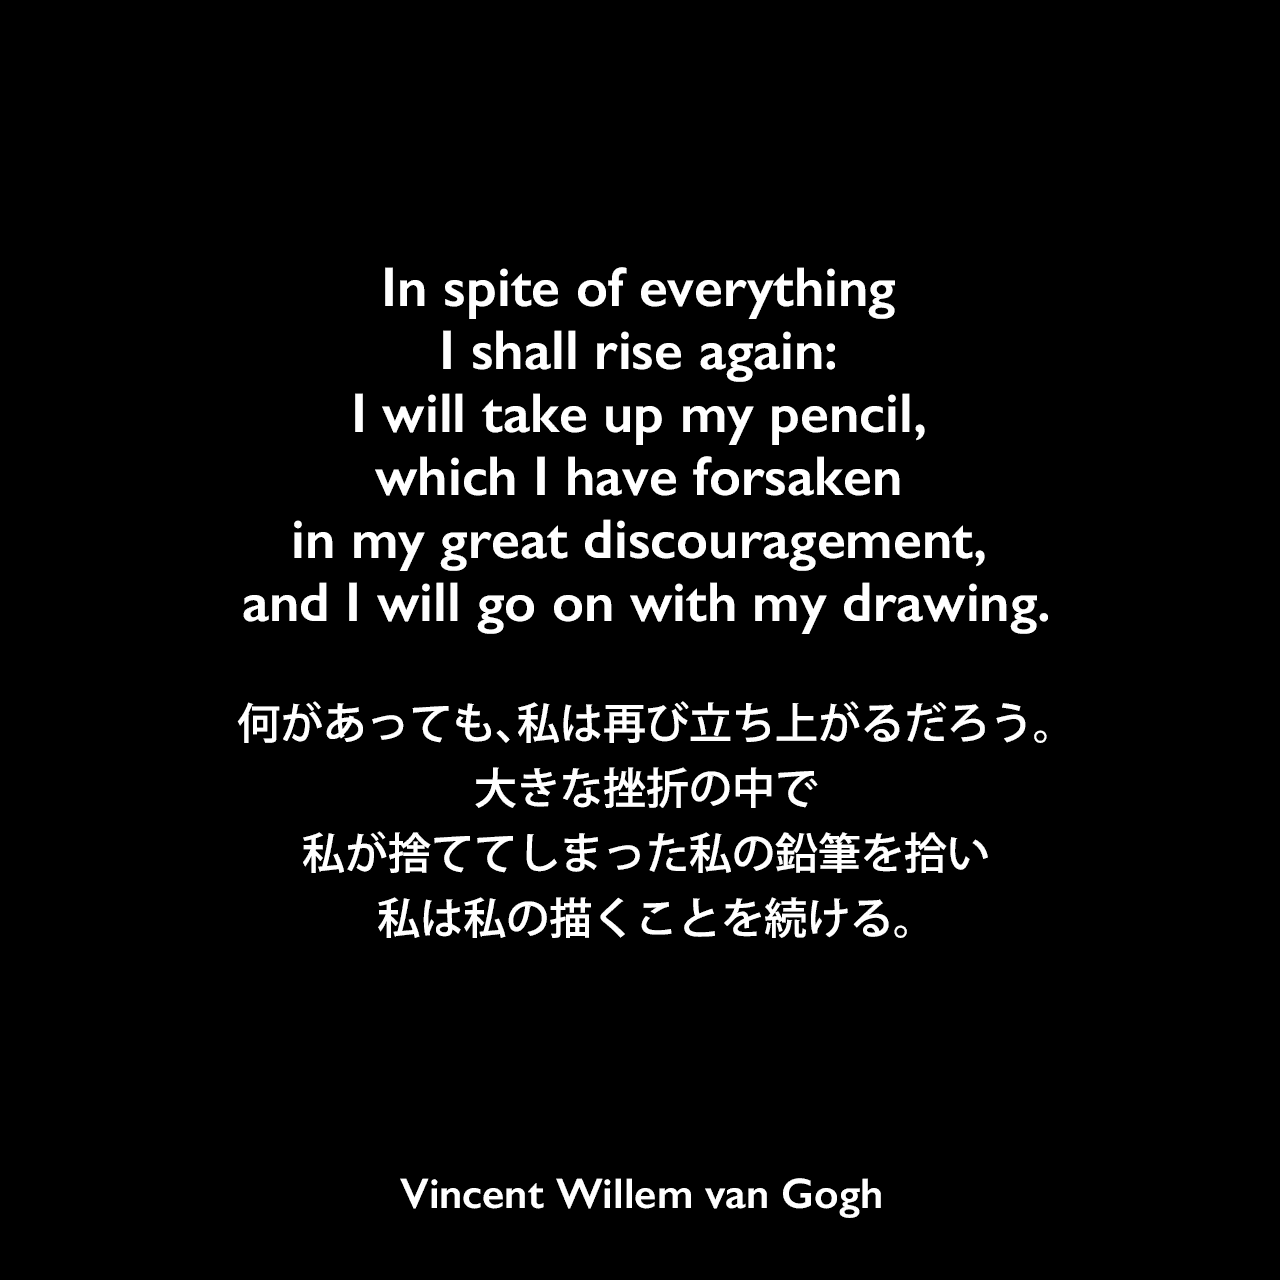 In spite of everything I shall rise again: I will take up my pencil, which I have forsaken in my great discouragement, and I will go on with my drawing.何があっても、私は再び立ち上がるだろう。大きな挫折の中で私が捨ててしまった私の鉛筆を拾い、私は私の描くことを続ける。- ゴッホの弟テオへ宛てた手紙よりVincent Willem van Gogh